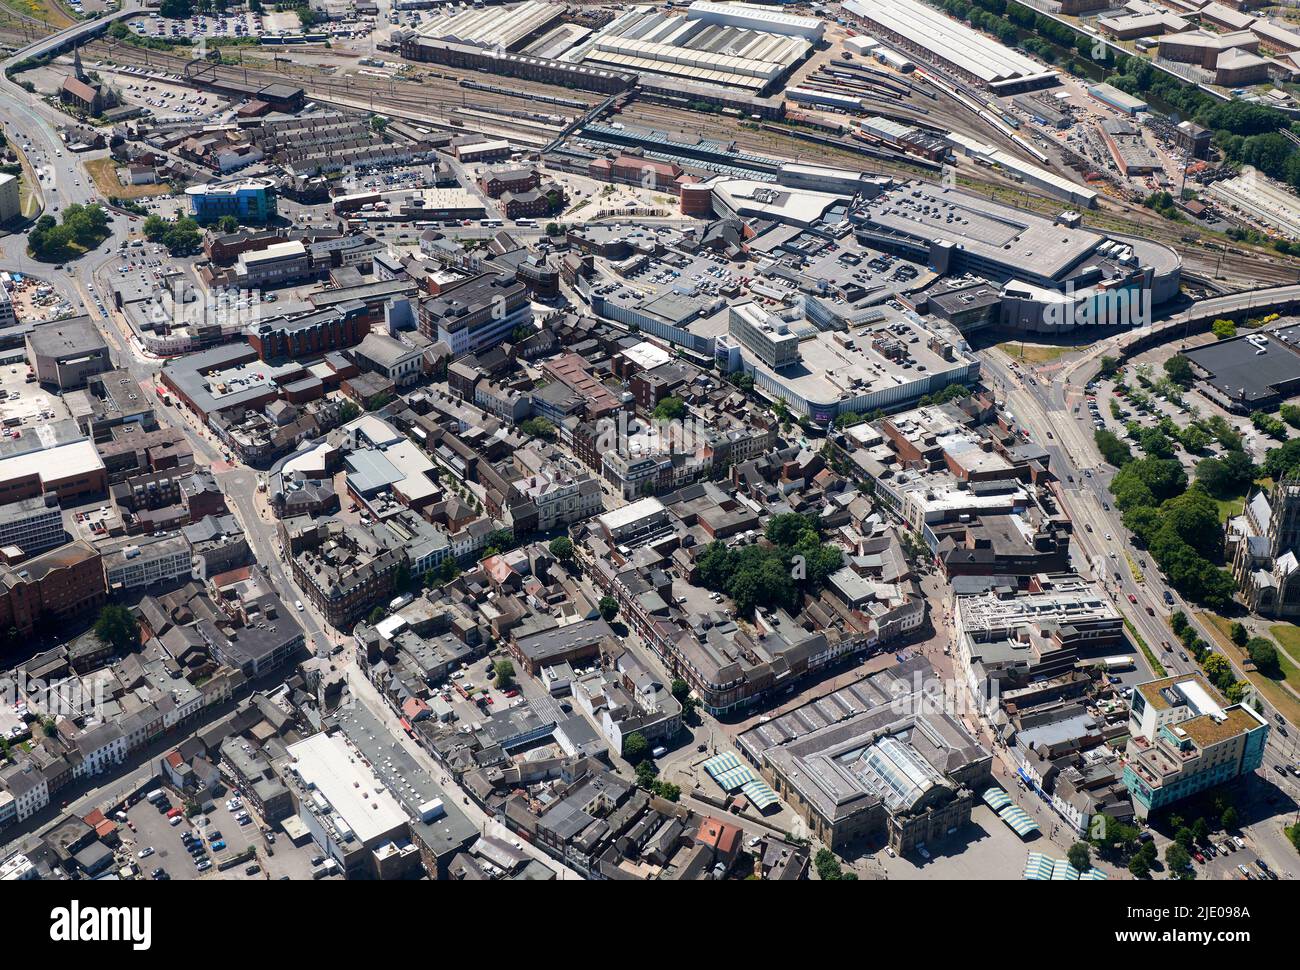 An aerial view of the City centre of Doncaster, South Yorkshire, Northern England, UK Stock Photo